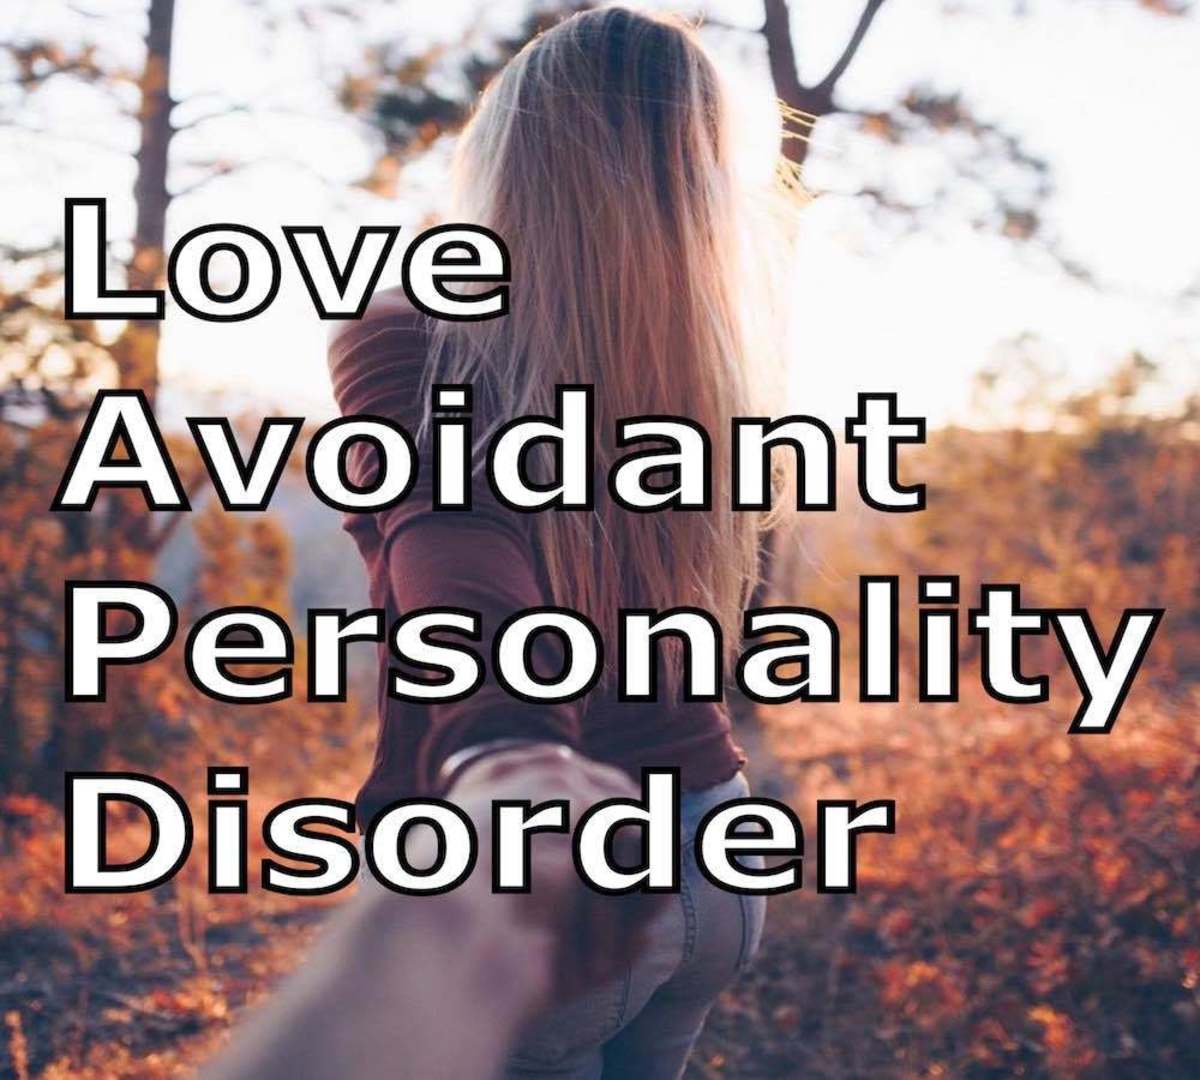 This Is What Happens When You Date a ‘Love Avoidant’ Person